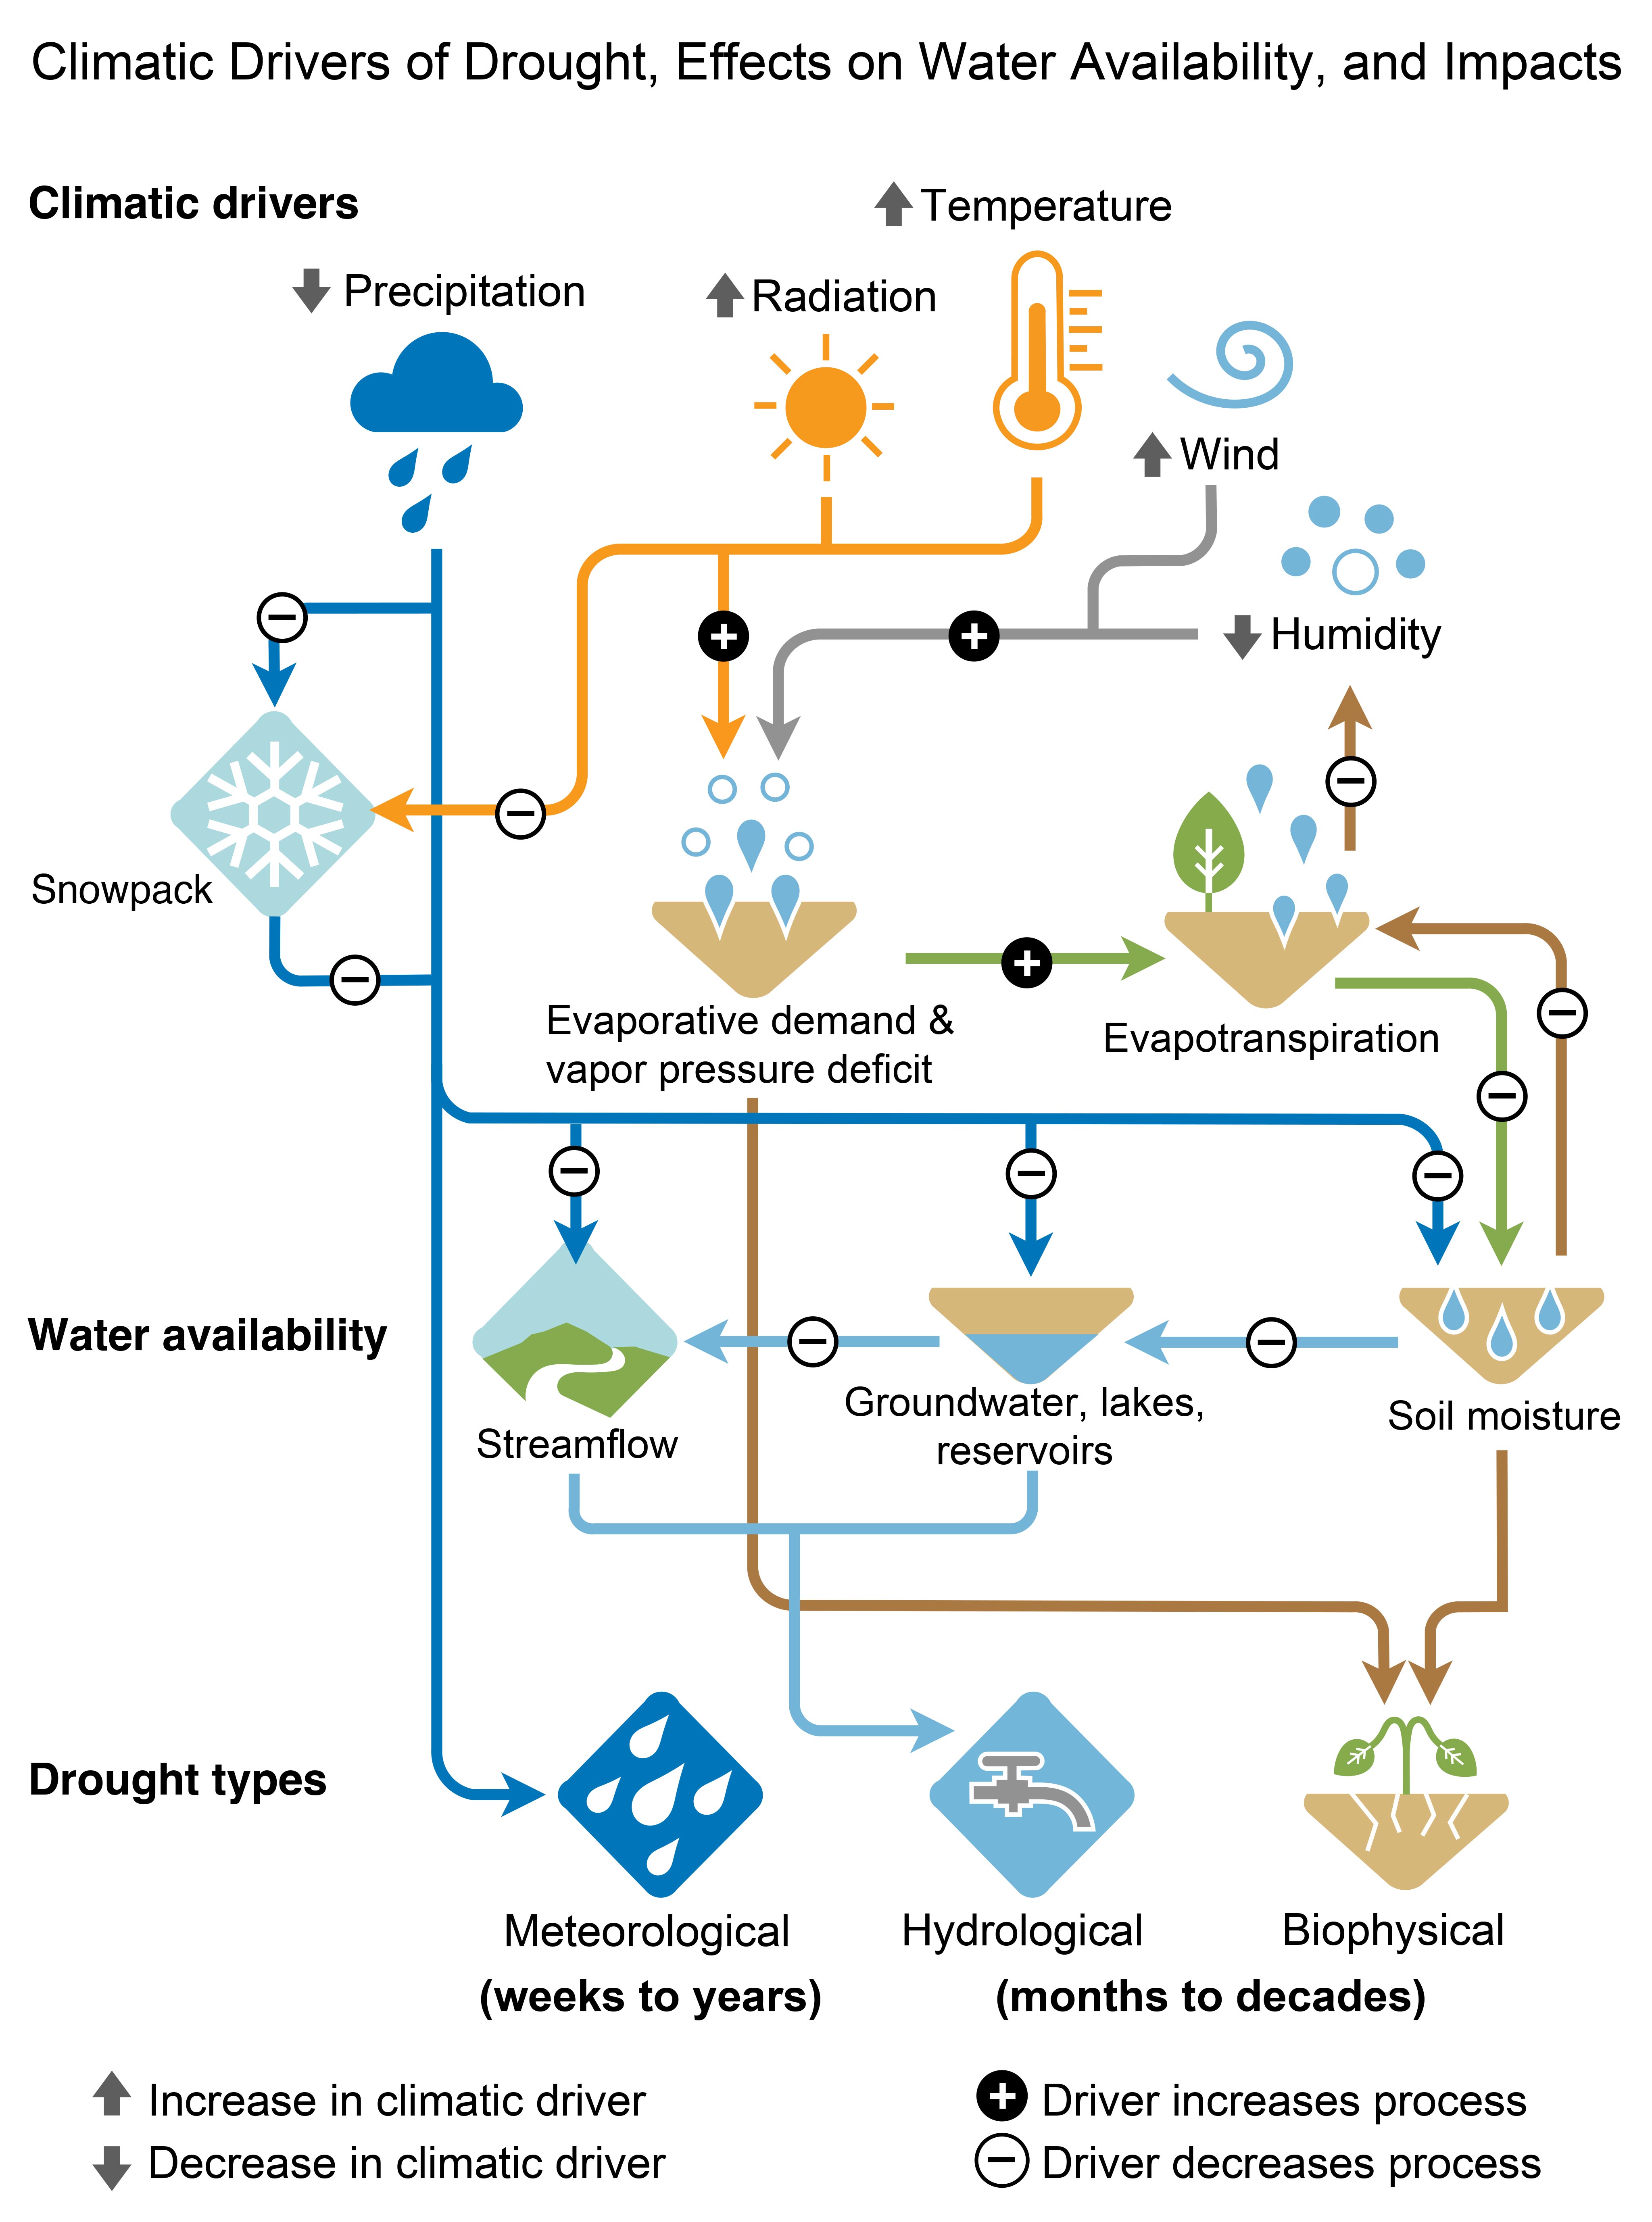 Climatic Drivers of Drought, Effects on Water Availability, and Impacts